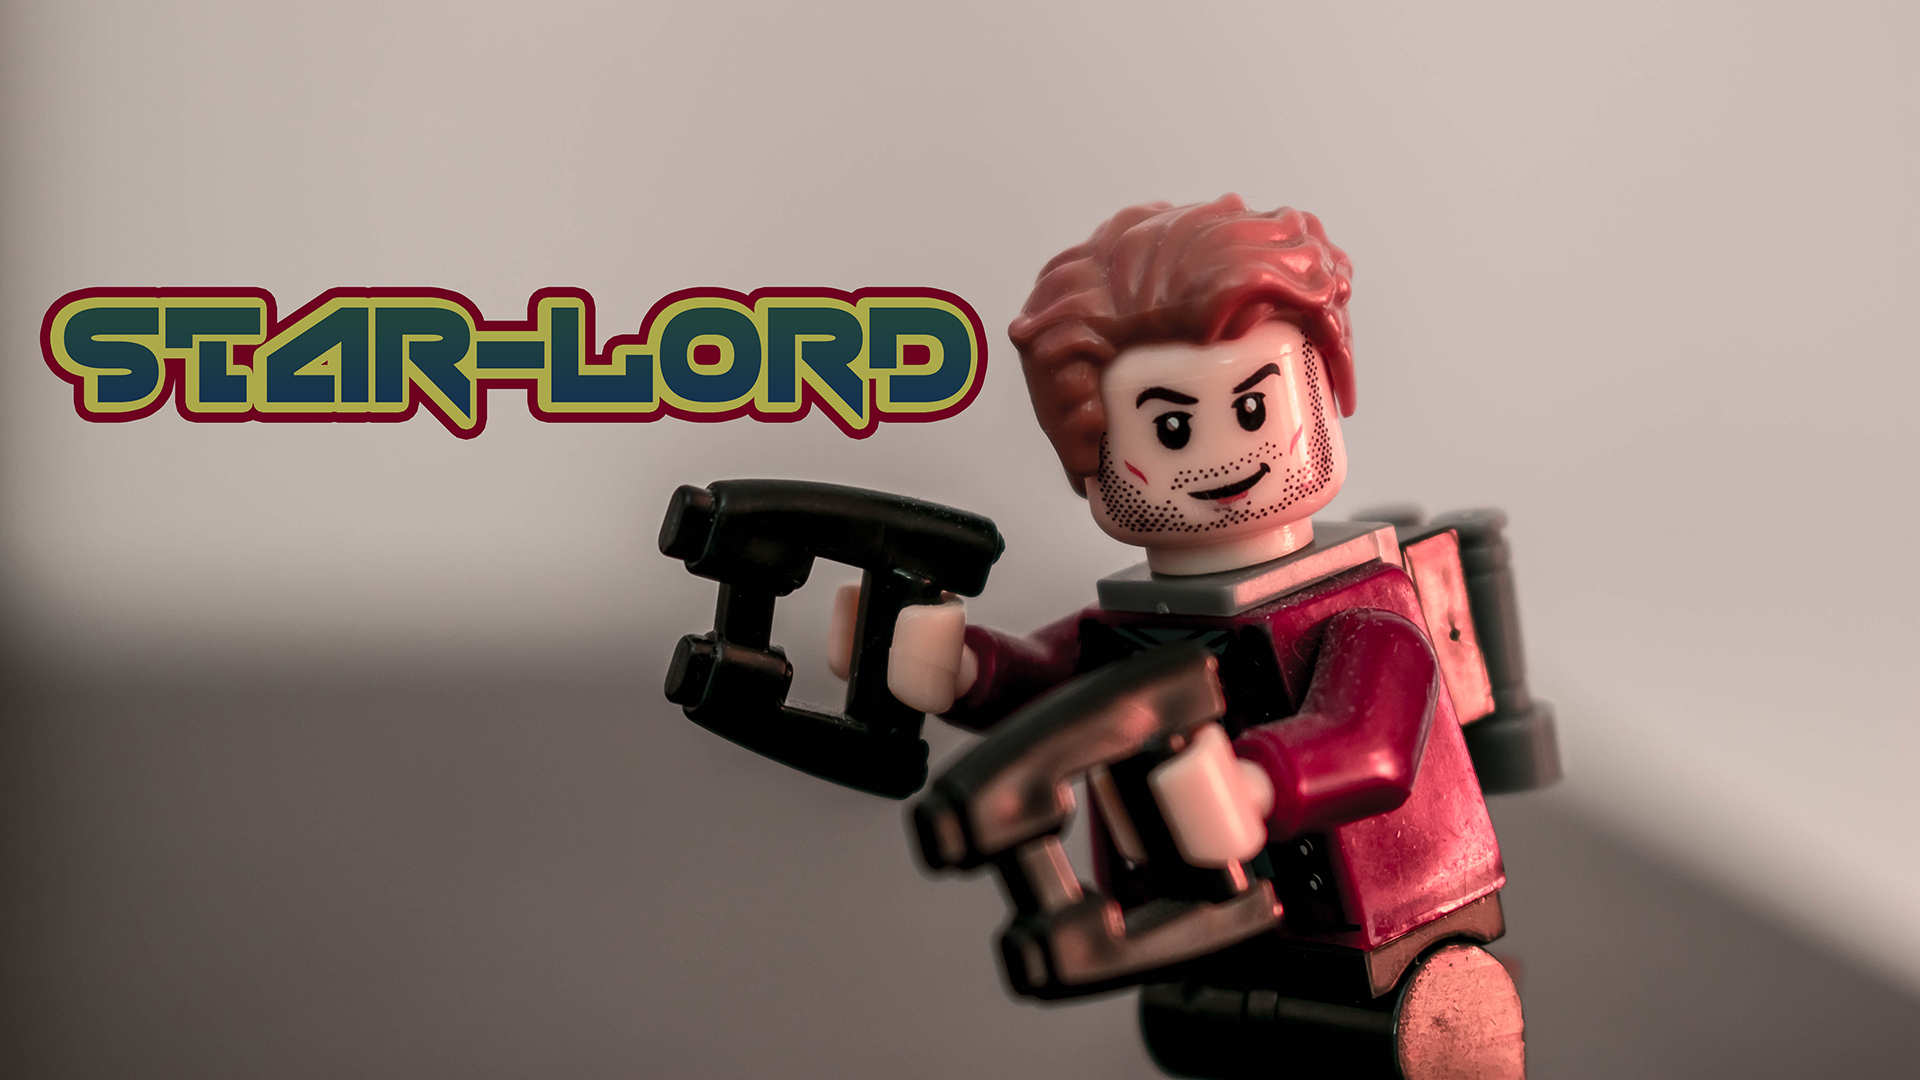 General 1920x1080 Guardians of the Galaxy Guardians of the Galaxy Vol. 2 LEGO pistol blurred simple background gray background retro style Marvel Comics Marvel Cinematic Universe Marvel Heroes Marvel Super Heroes Star-Lord figurines toys